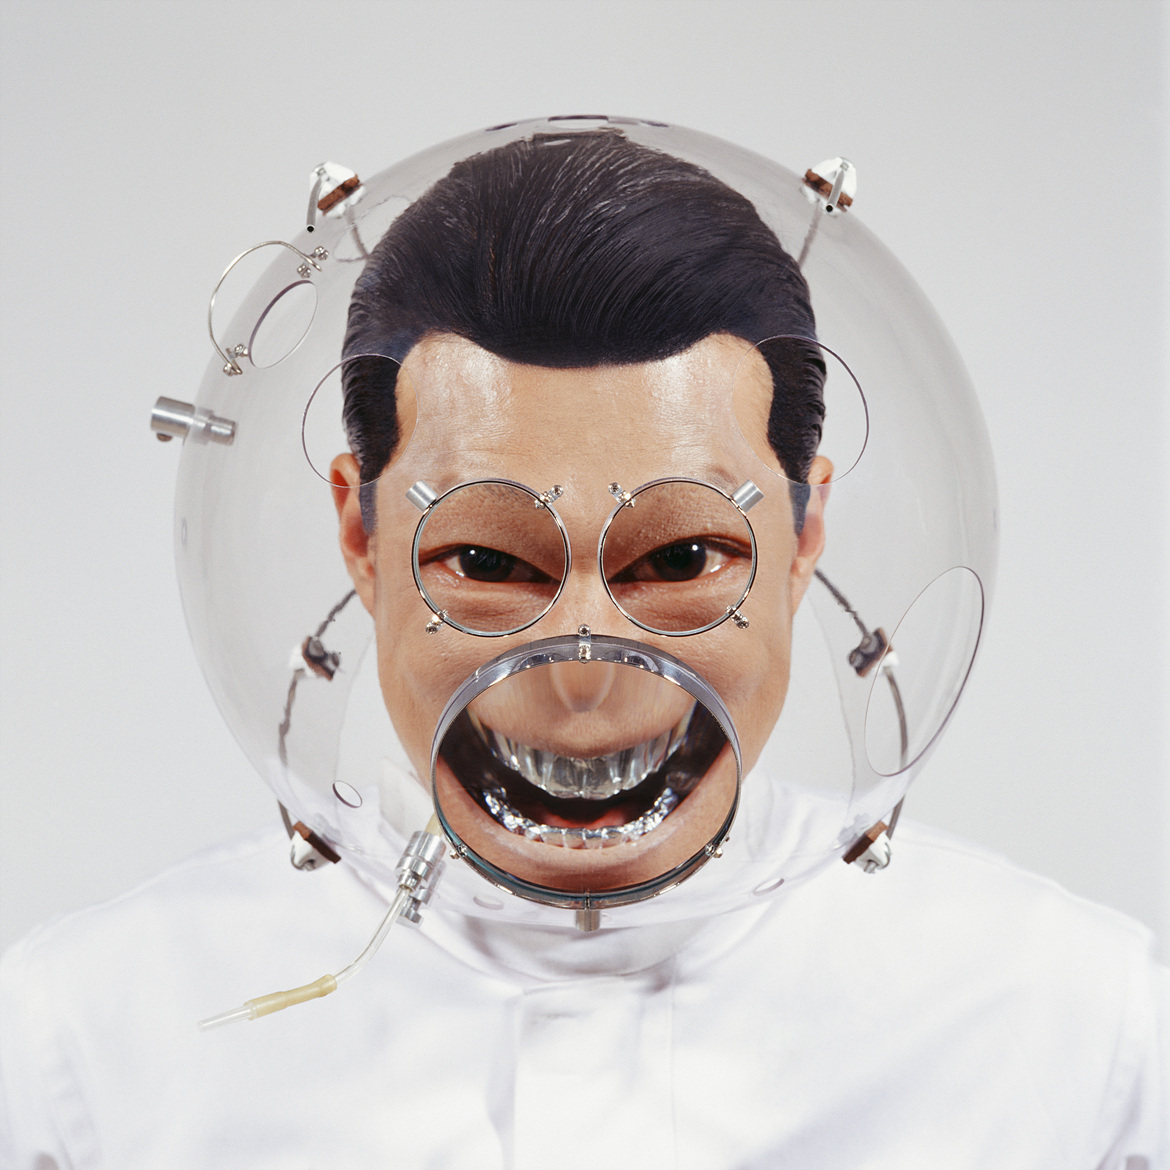 Ли кри. Hyungkoo Lee. Bizarre Creations. Exaggerated facial.